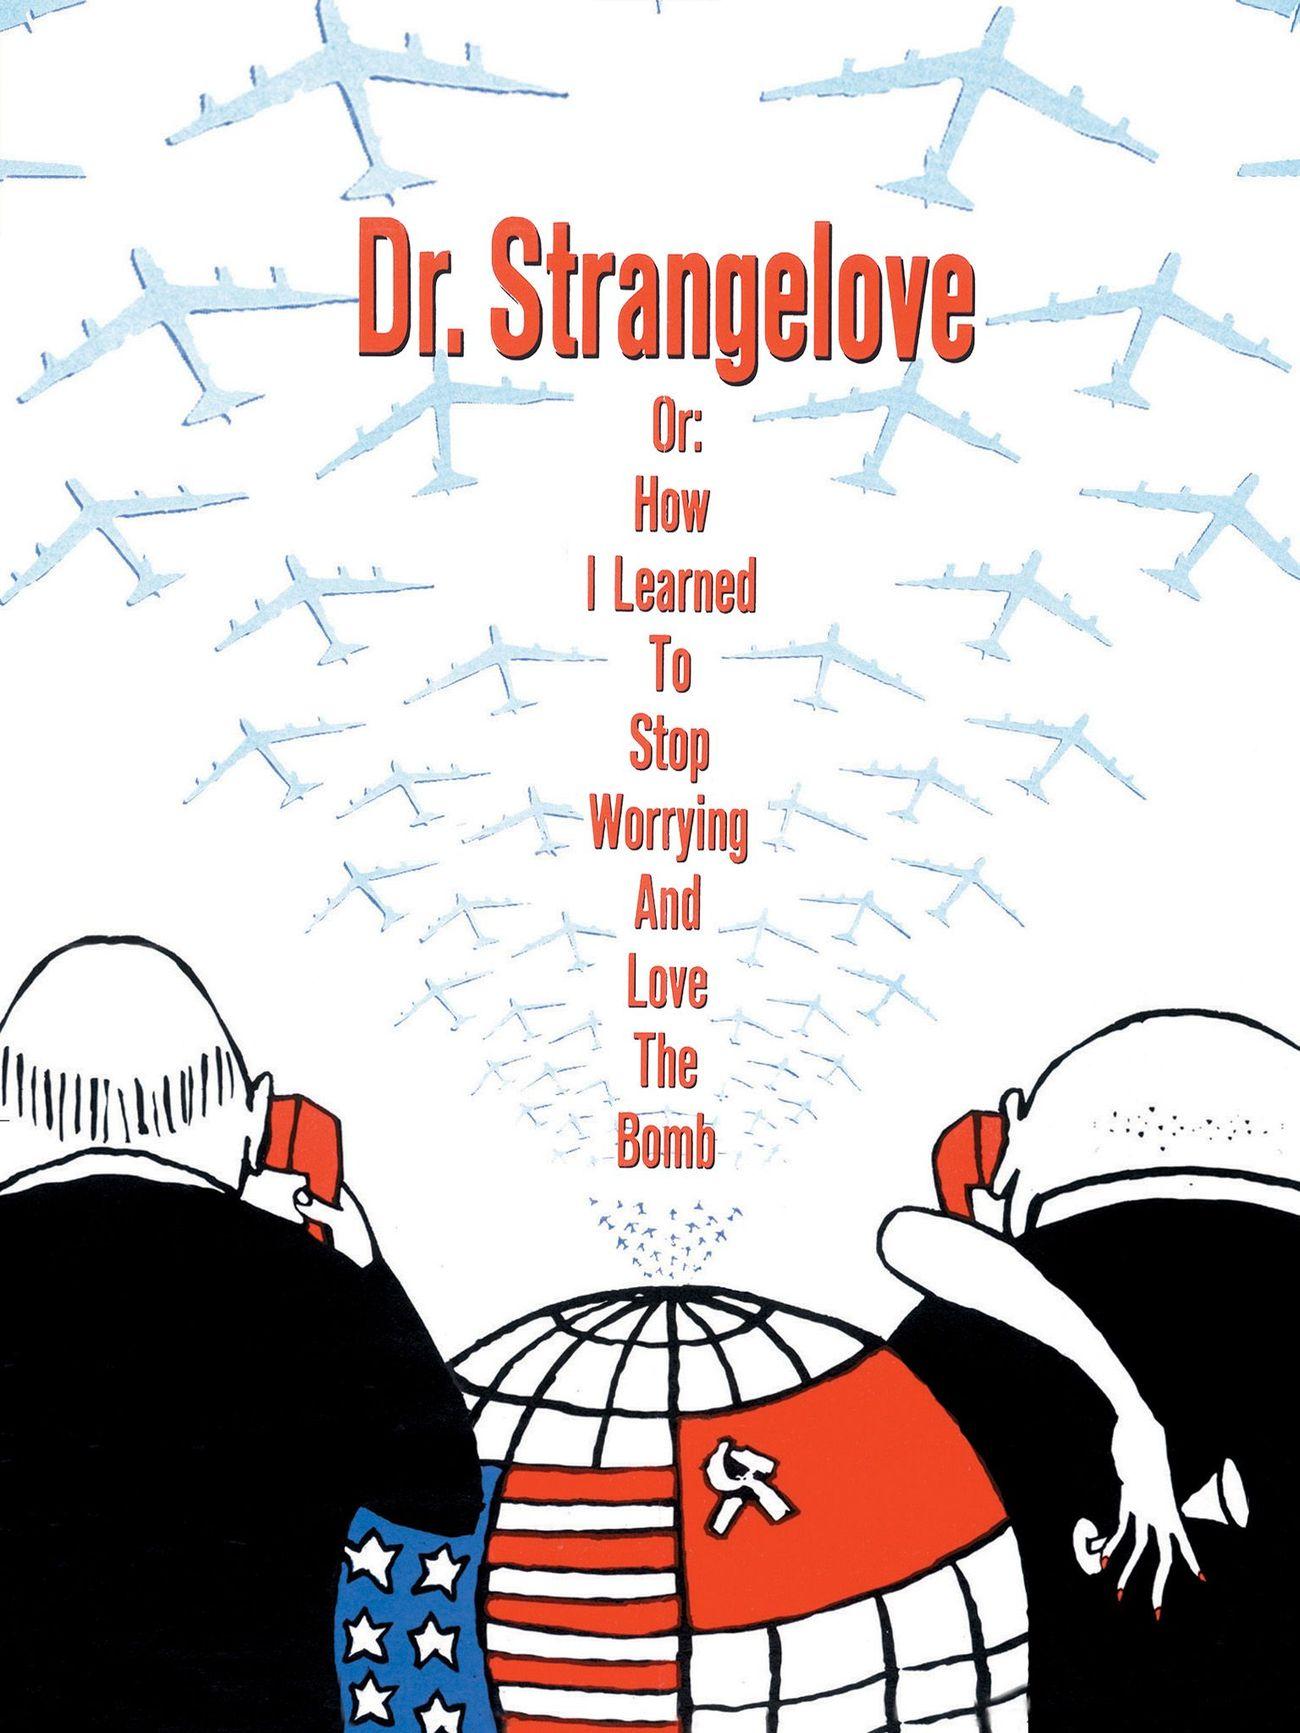 Dr Strangelove Or How I Learned To S 4K Worrying And Love The Bomb